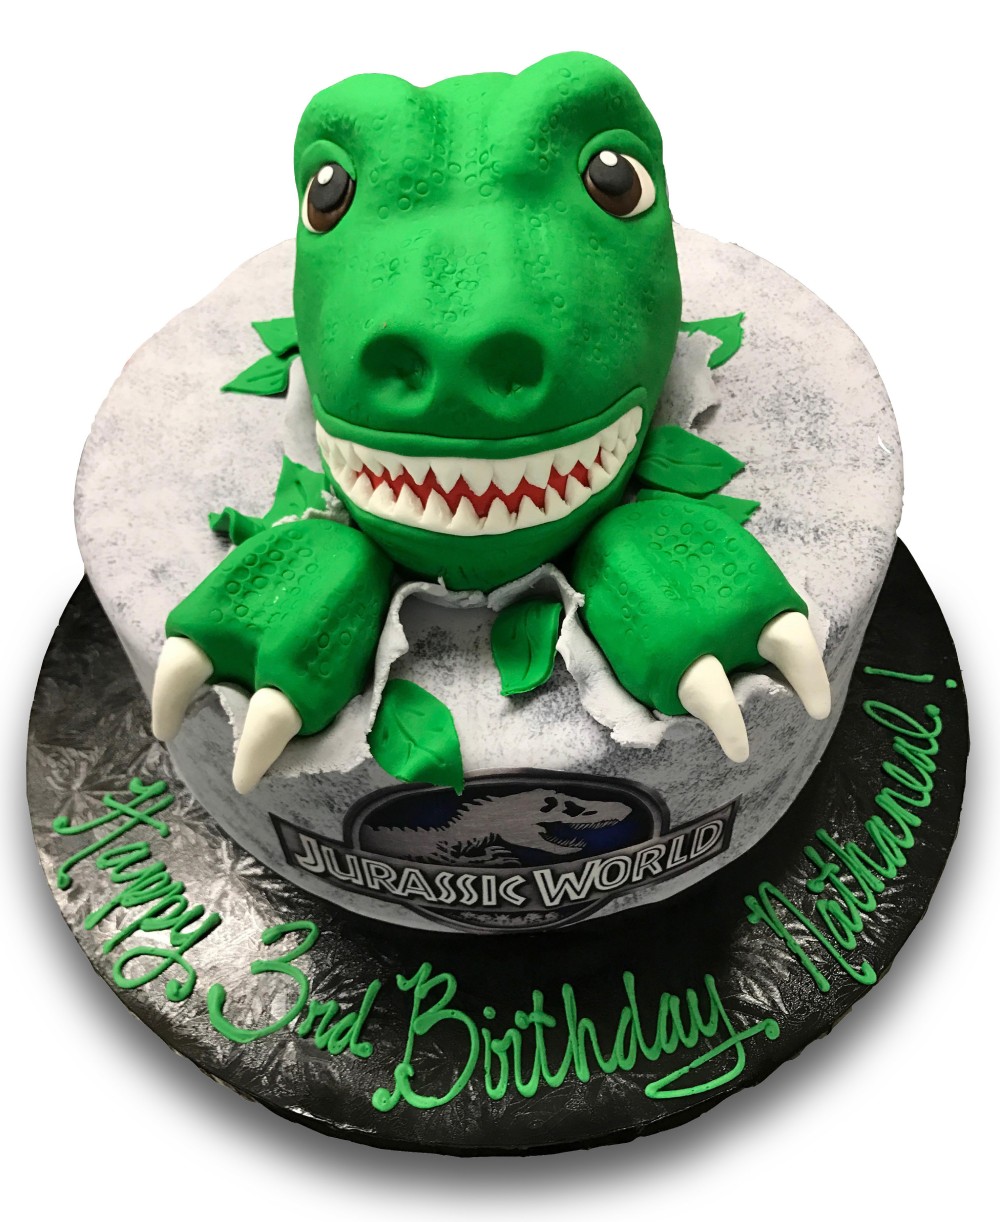 Fondant covered cake with fondant dinosaur head and jurassic park scan